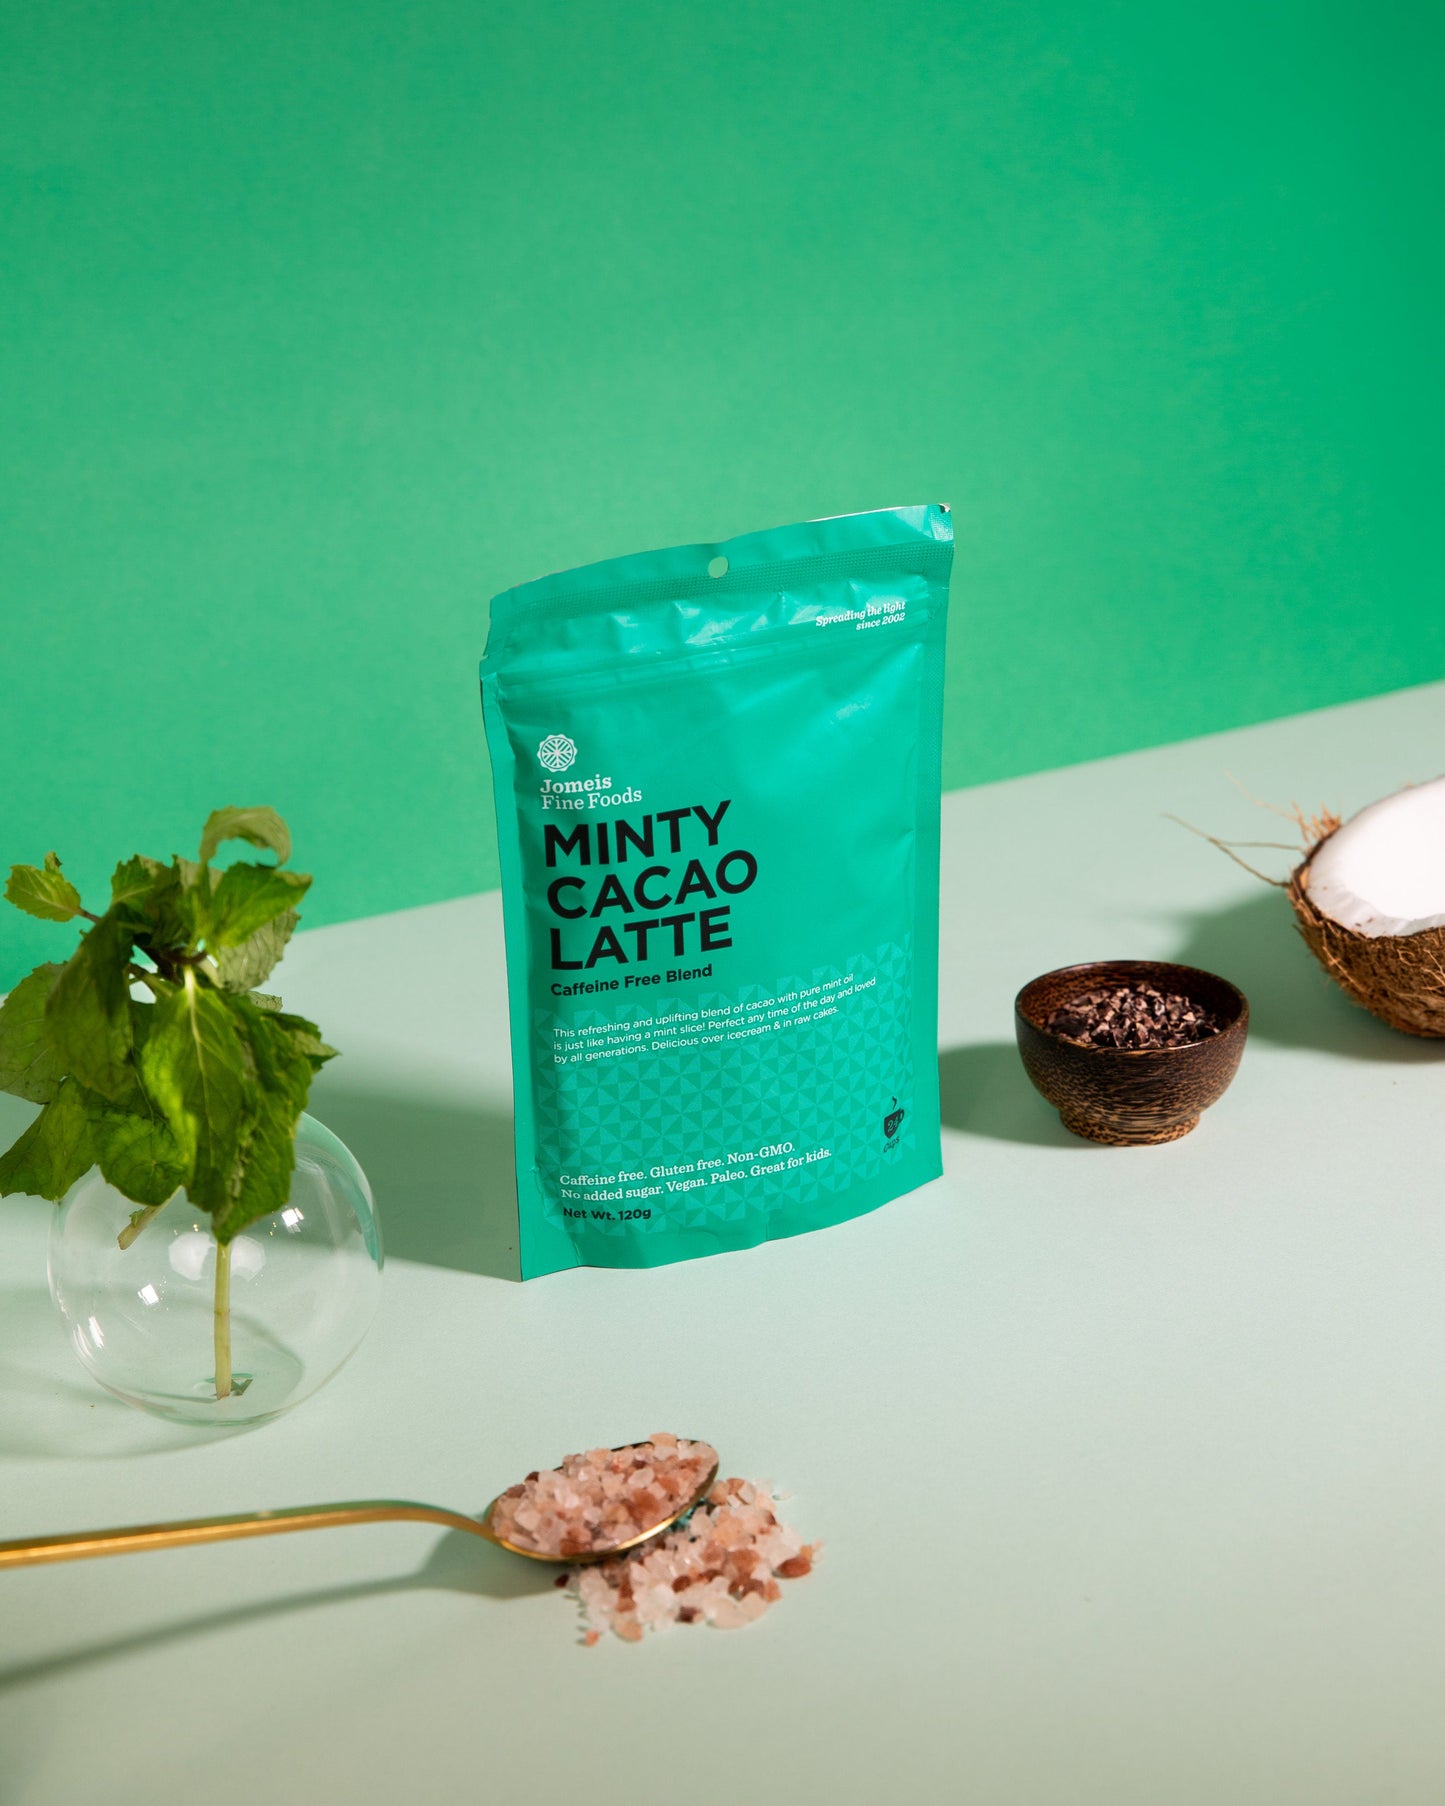 Minty Cacao Latte